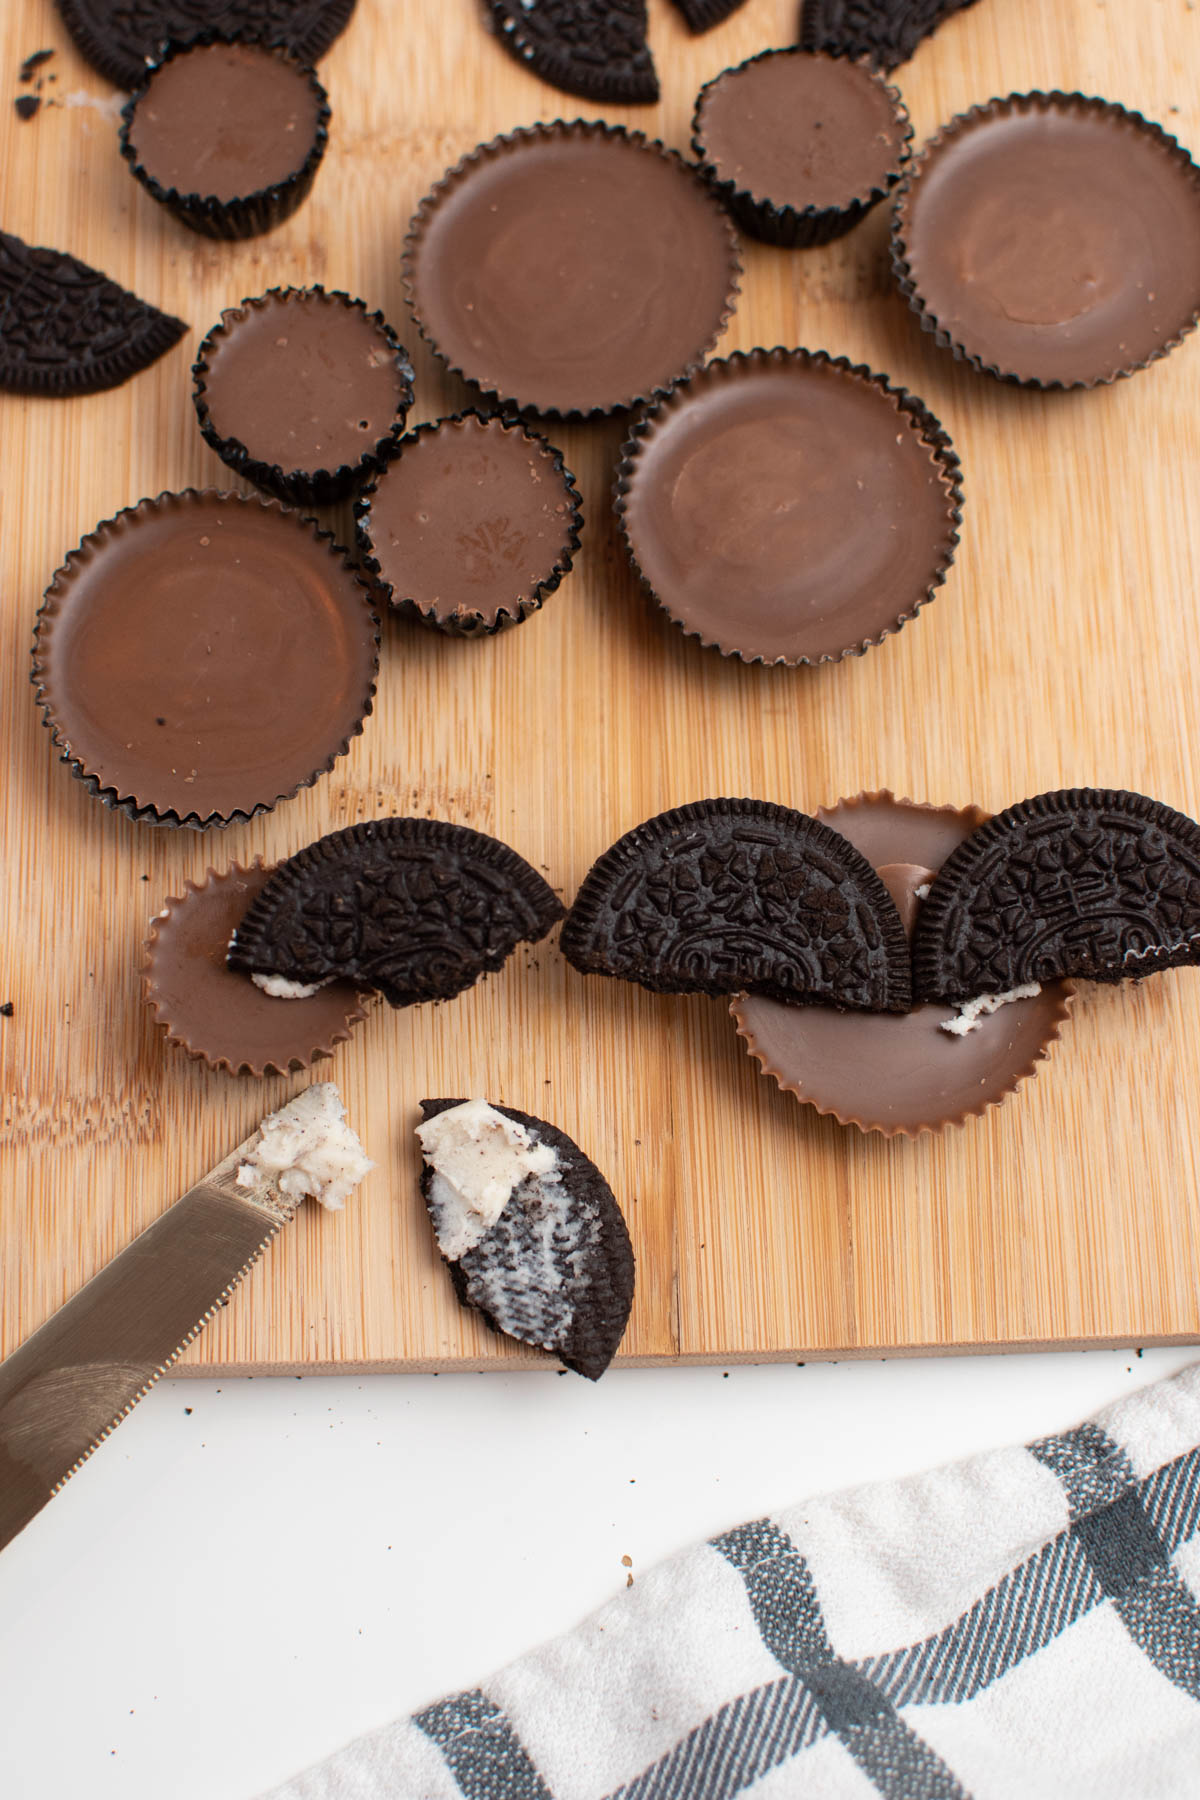 Frosted Oreo halves attached to Reese's cups with frosting.